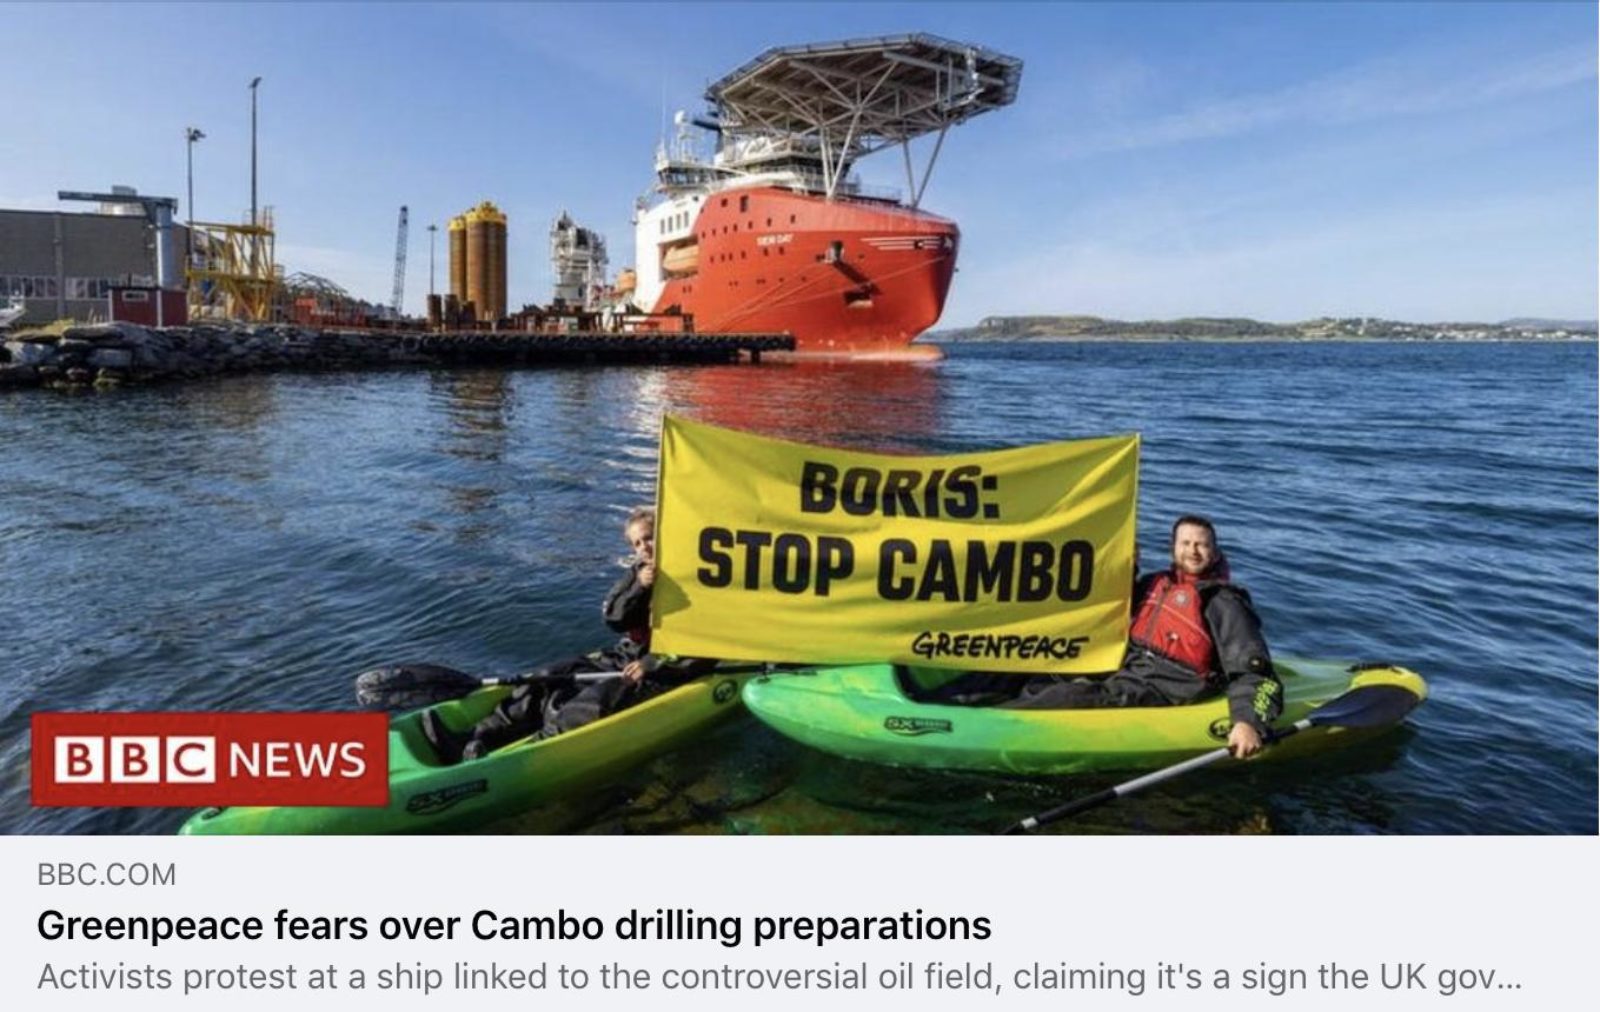 Image of a BBC news article titled "Greenpeace fears over Cambo drilling preparations"